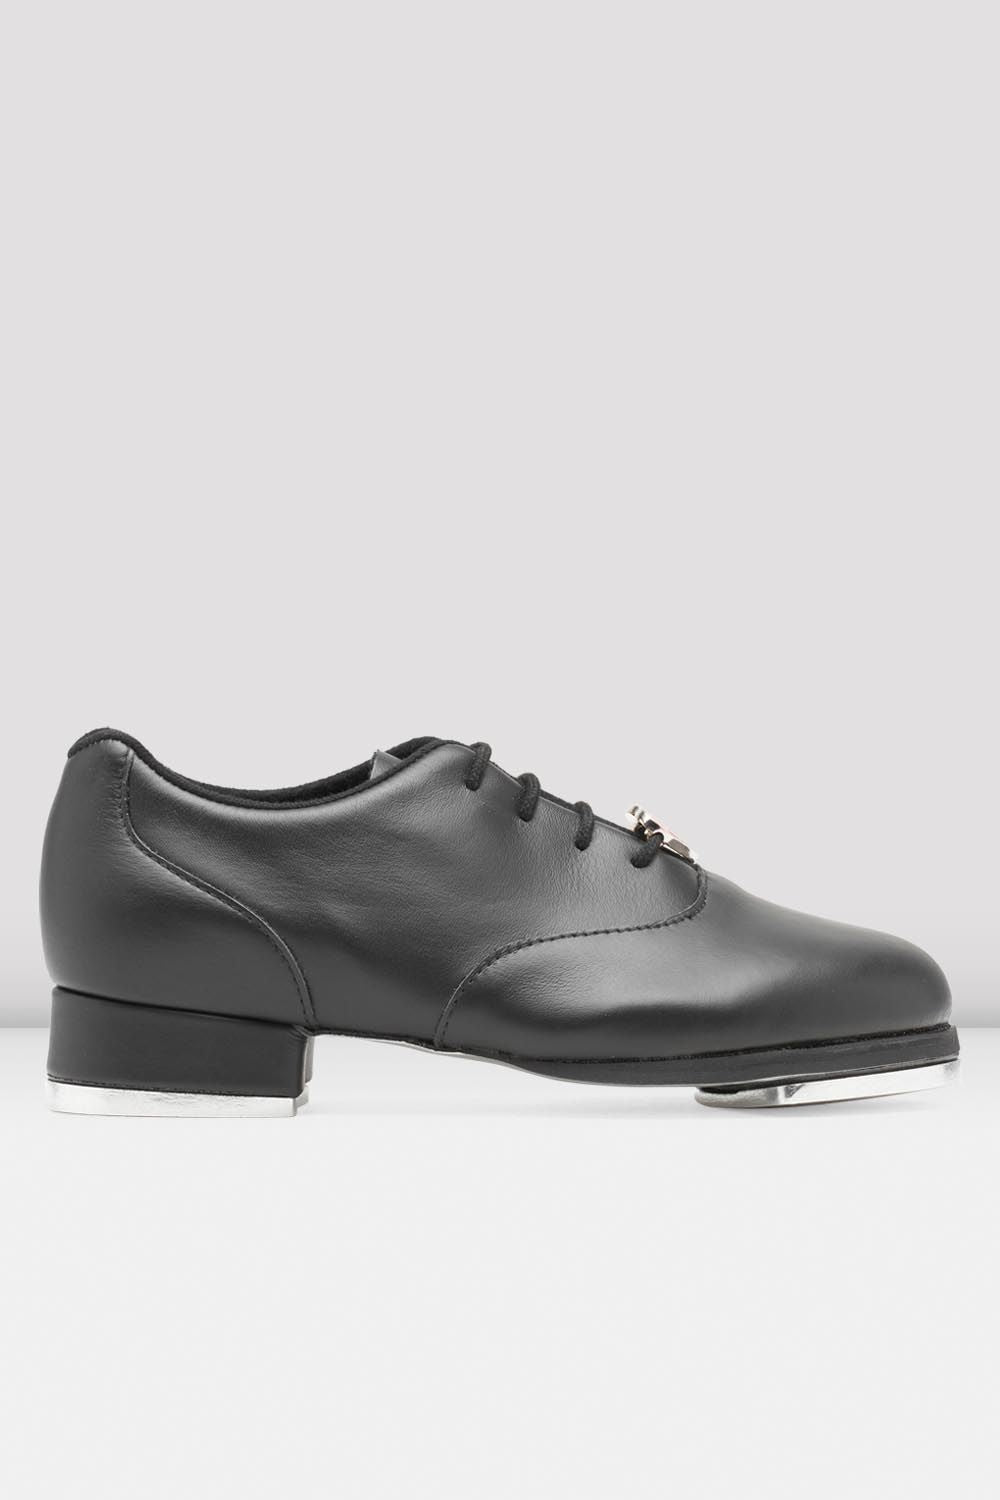 BLOCH Ladies Chloe And Maud Tap Shoes, Black Leather